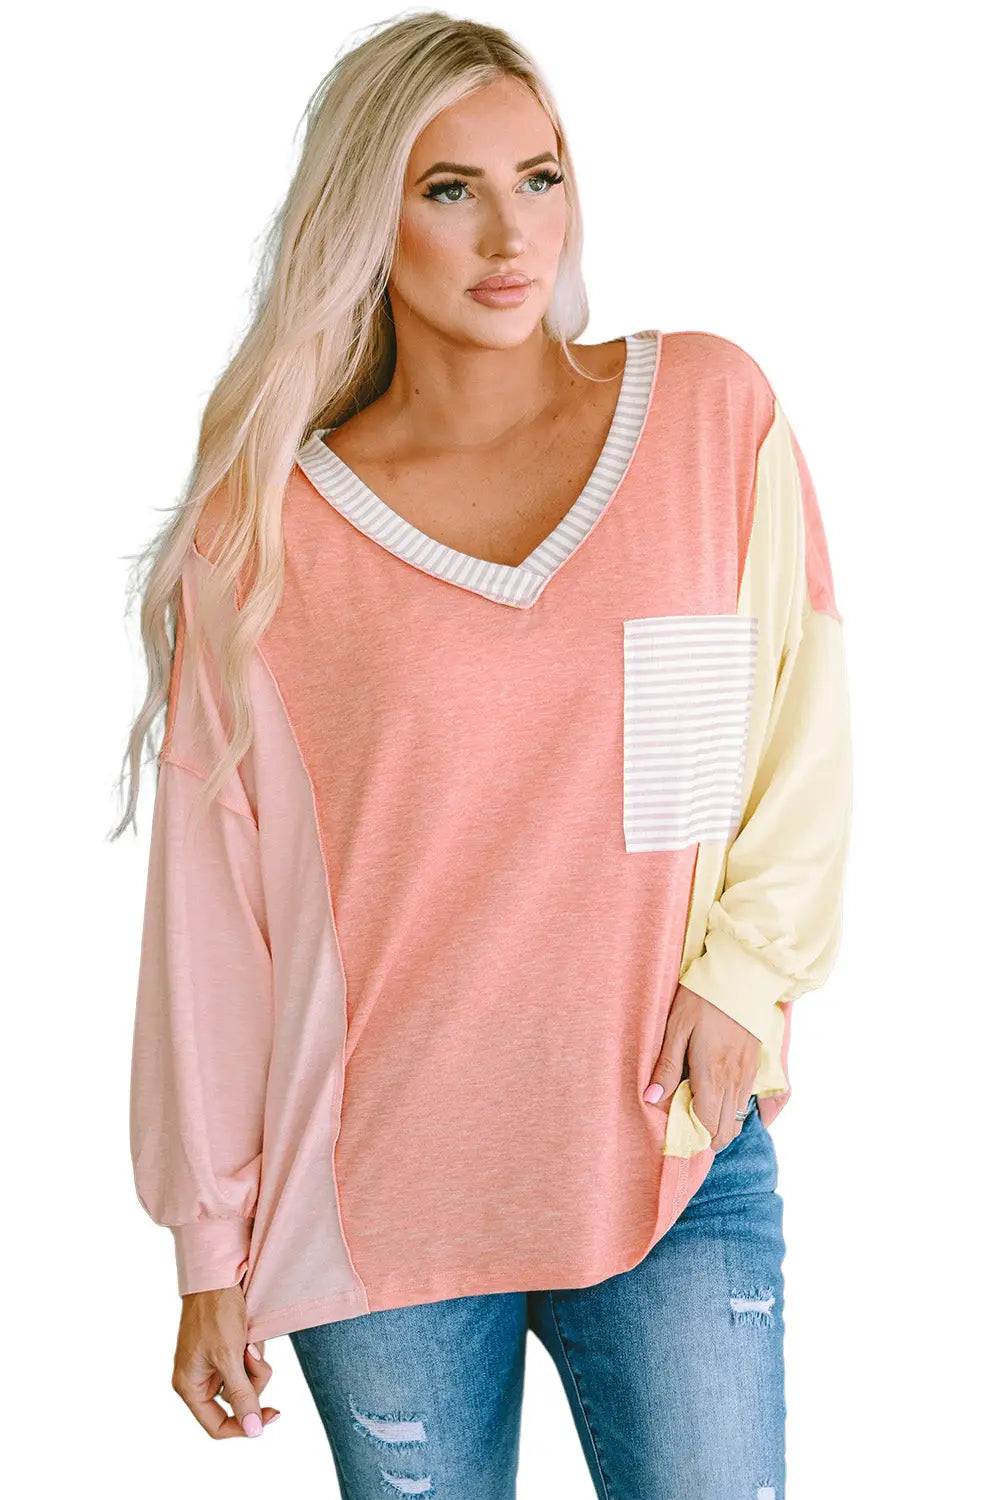 Striped color block splicing long sleeve t shirt - tops